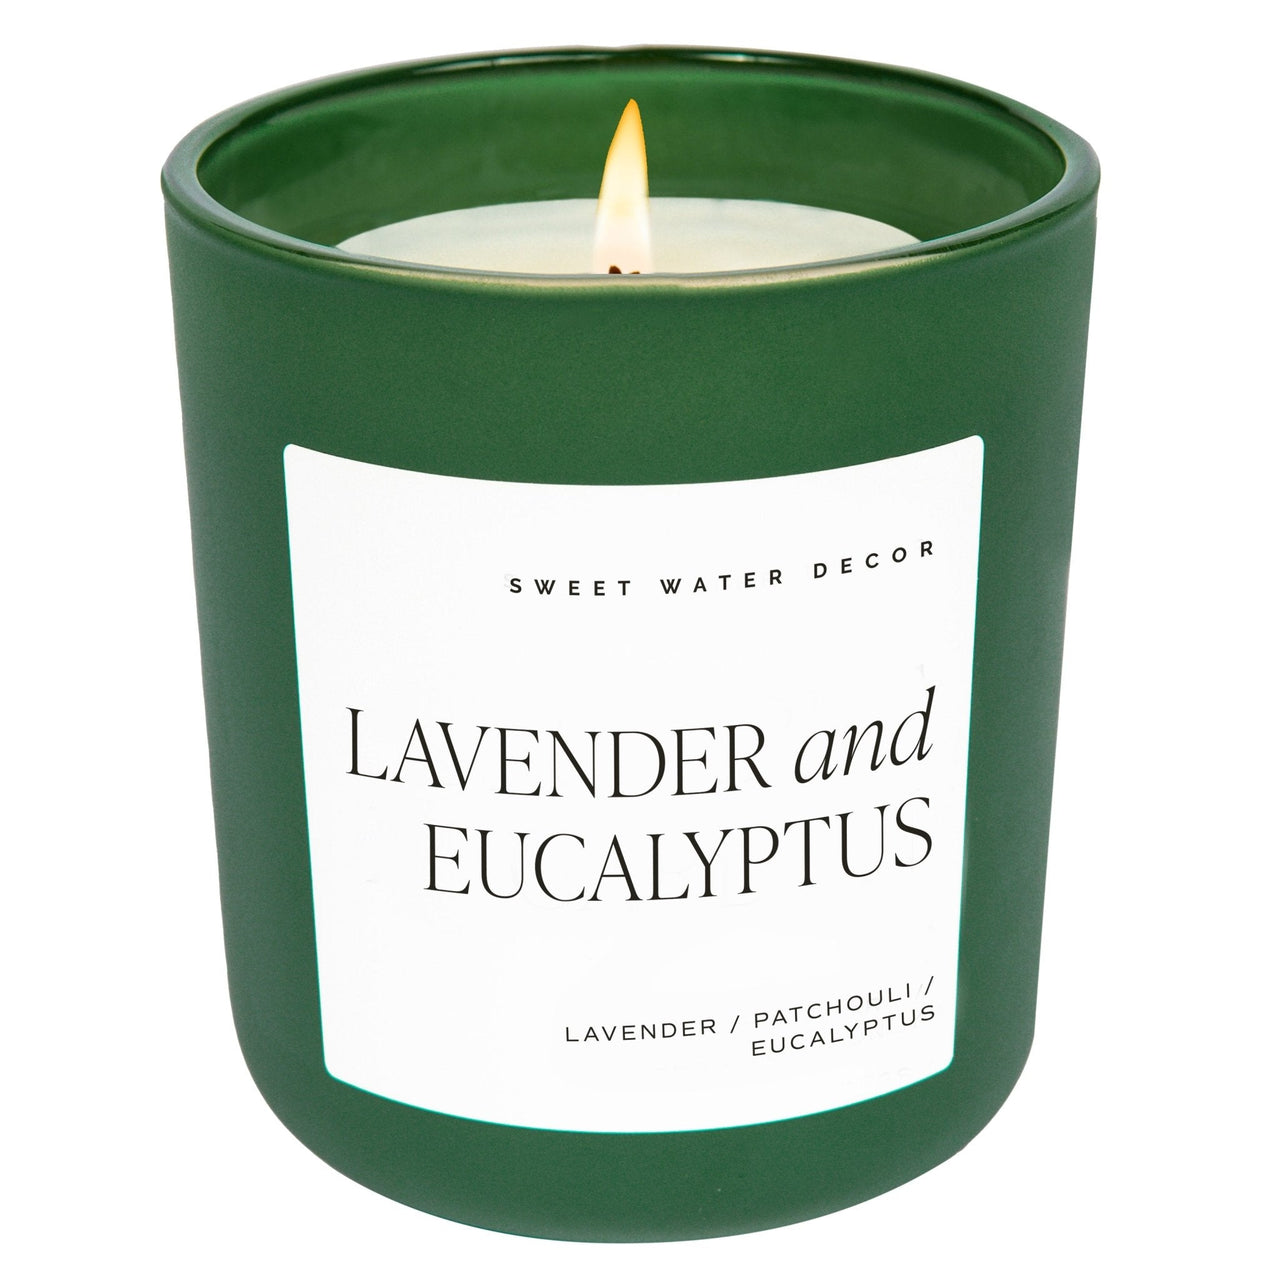 Lavender and Eucalyptus Soy Candle - Green Matte Jar - 15 oz - Tony's Home Furnishings